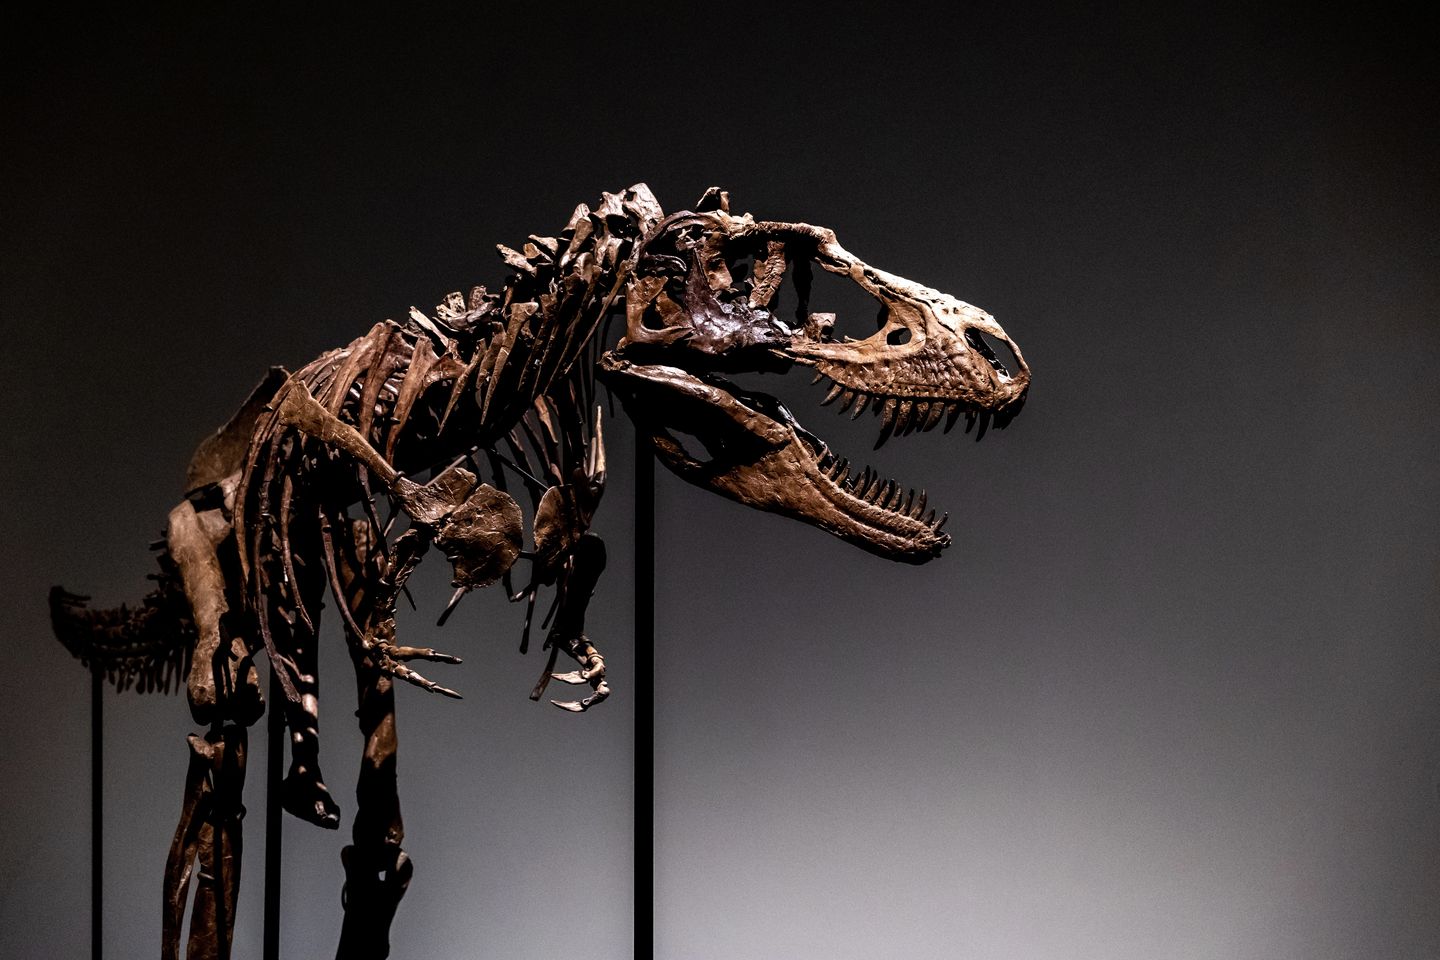 Fossilized dinosaur skeleton to be auctioned in NYC